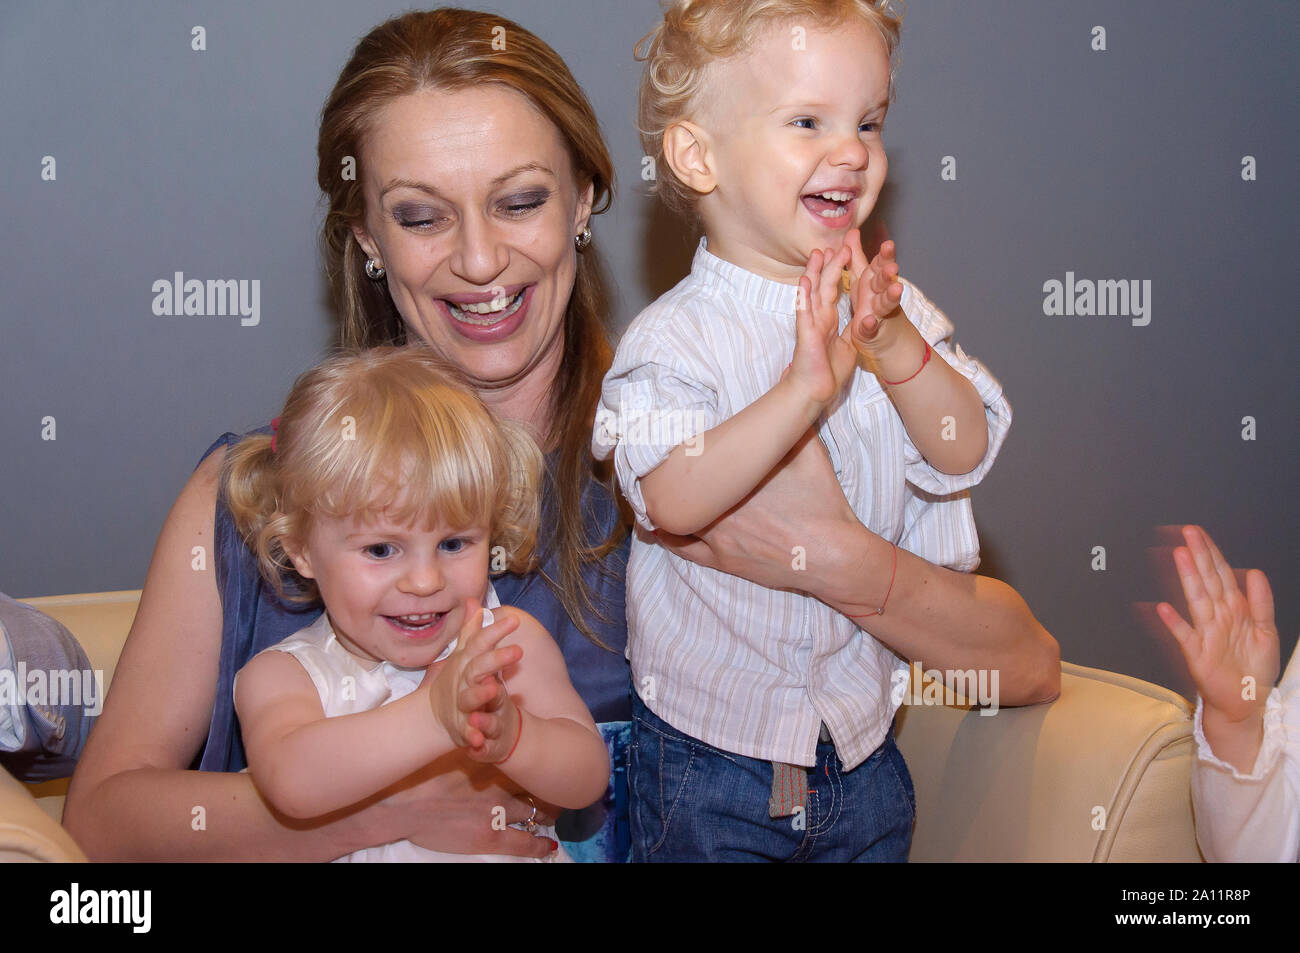 Candid authentic portrait of happy laughing family of mum and two cute little children clapping hands at indoors kid's party Stock Photo